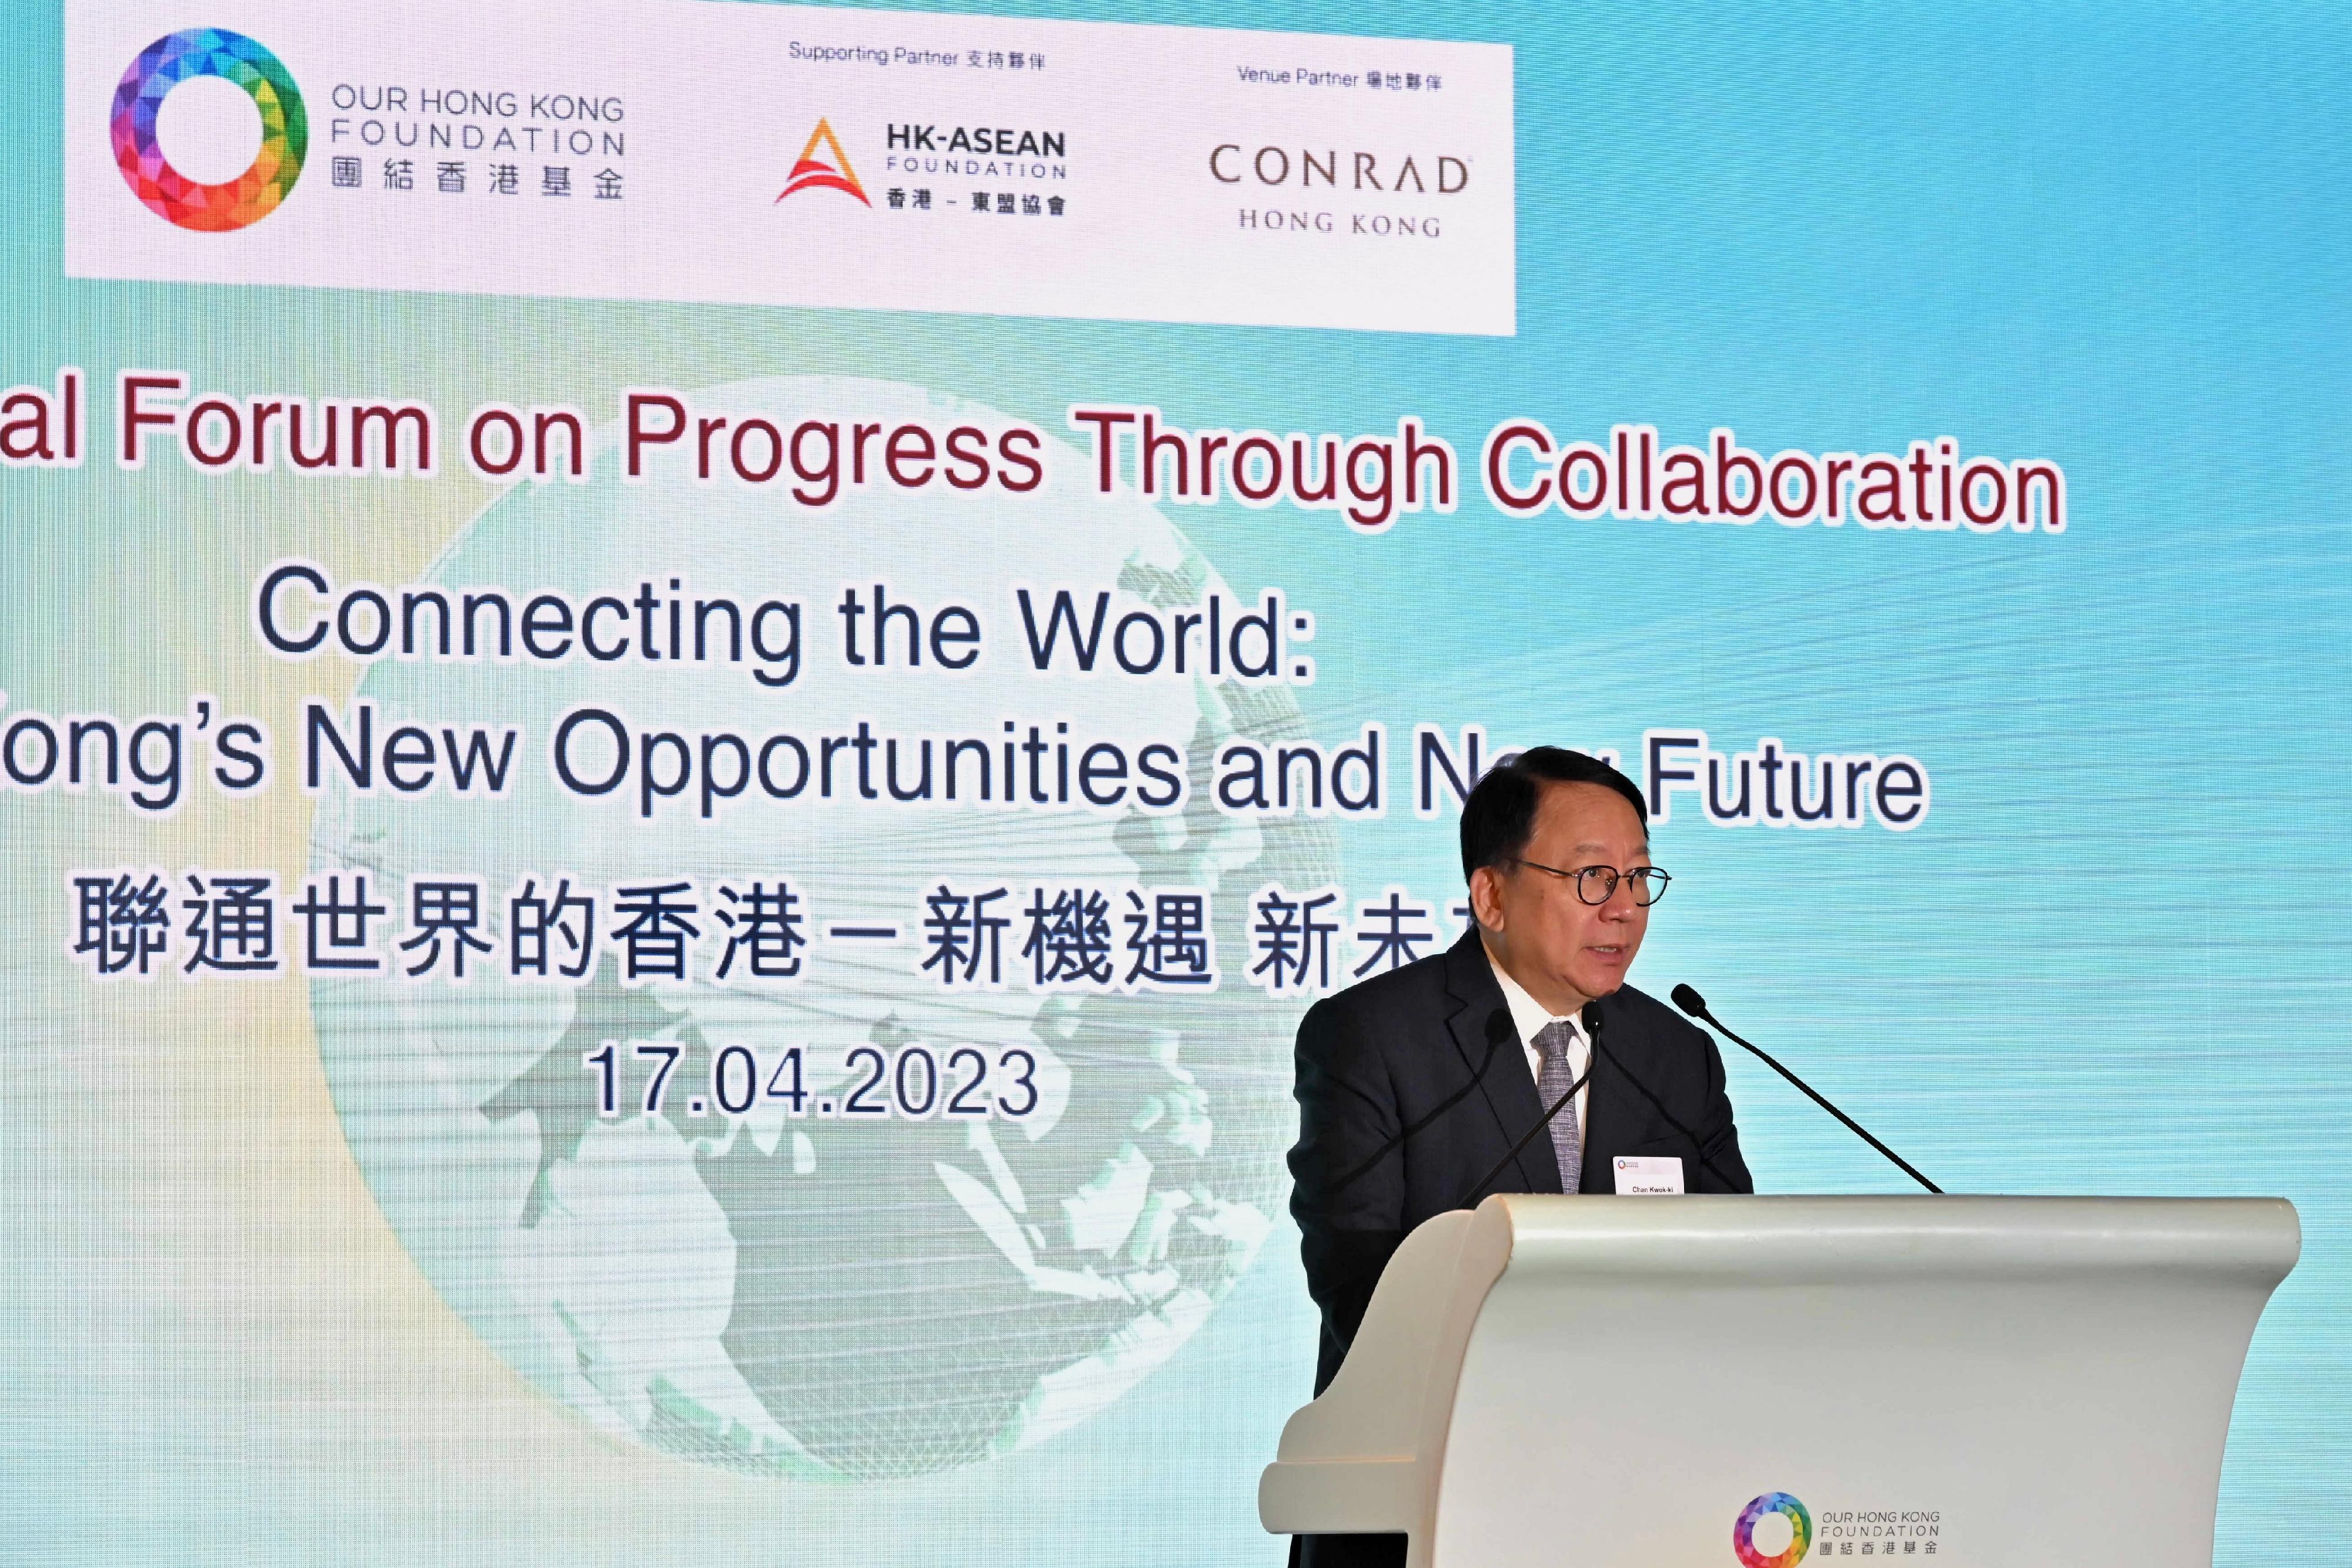 The Chief Secretary for Administration, Mr Chan Kwok-ki, speaks at the Our Hong Kong Foundation International Forum on Progress through Collaboration today (April 17).